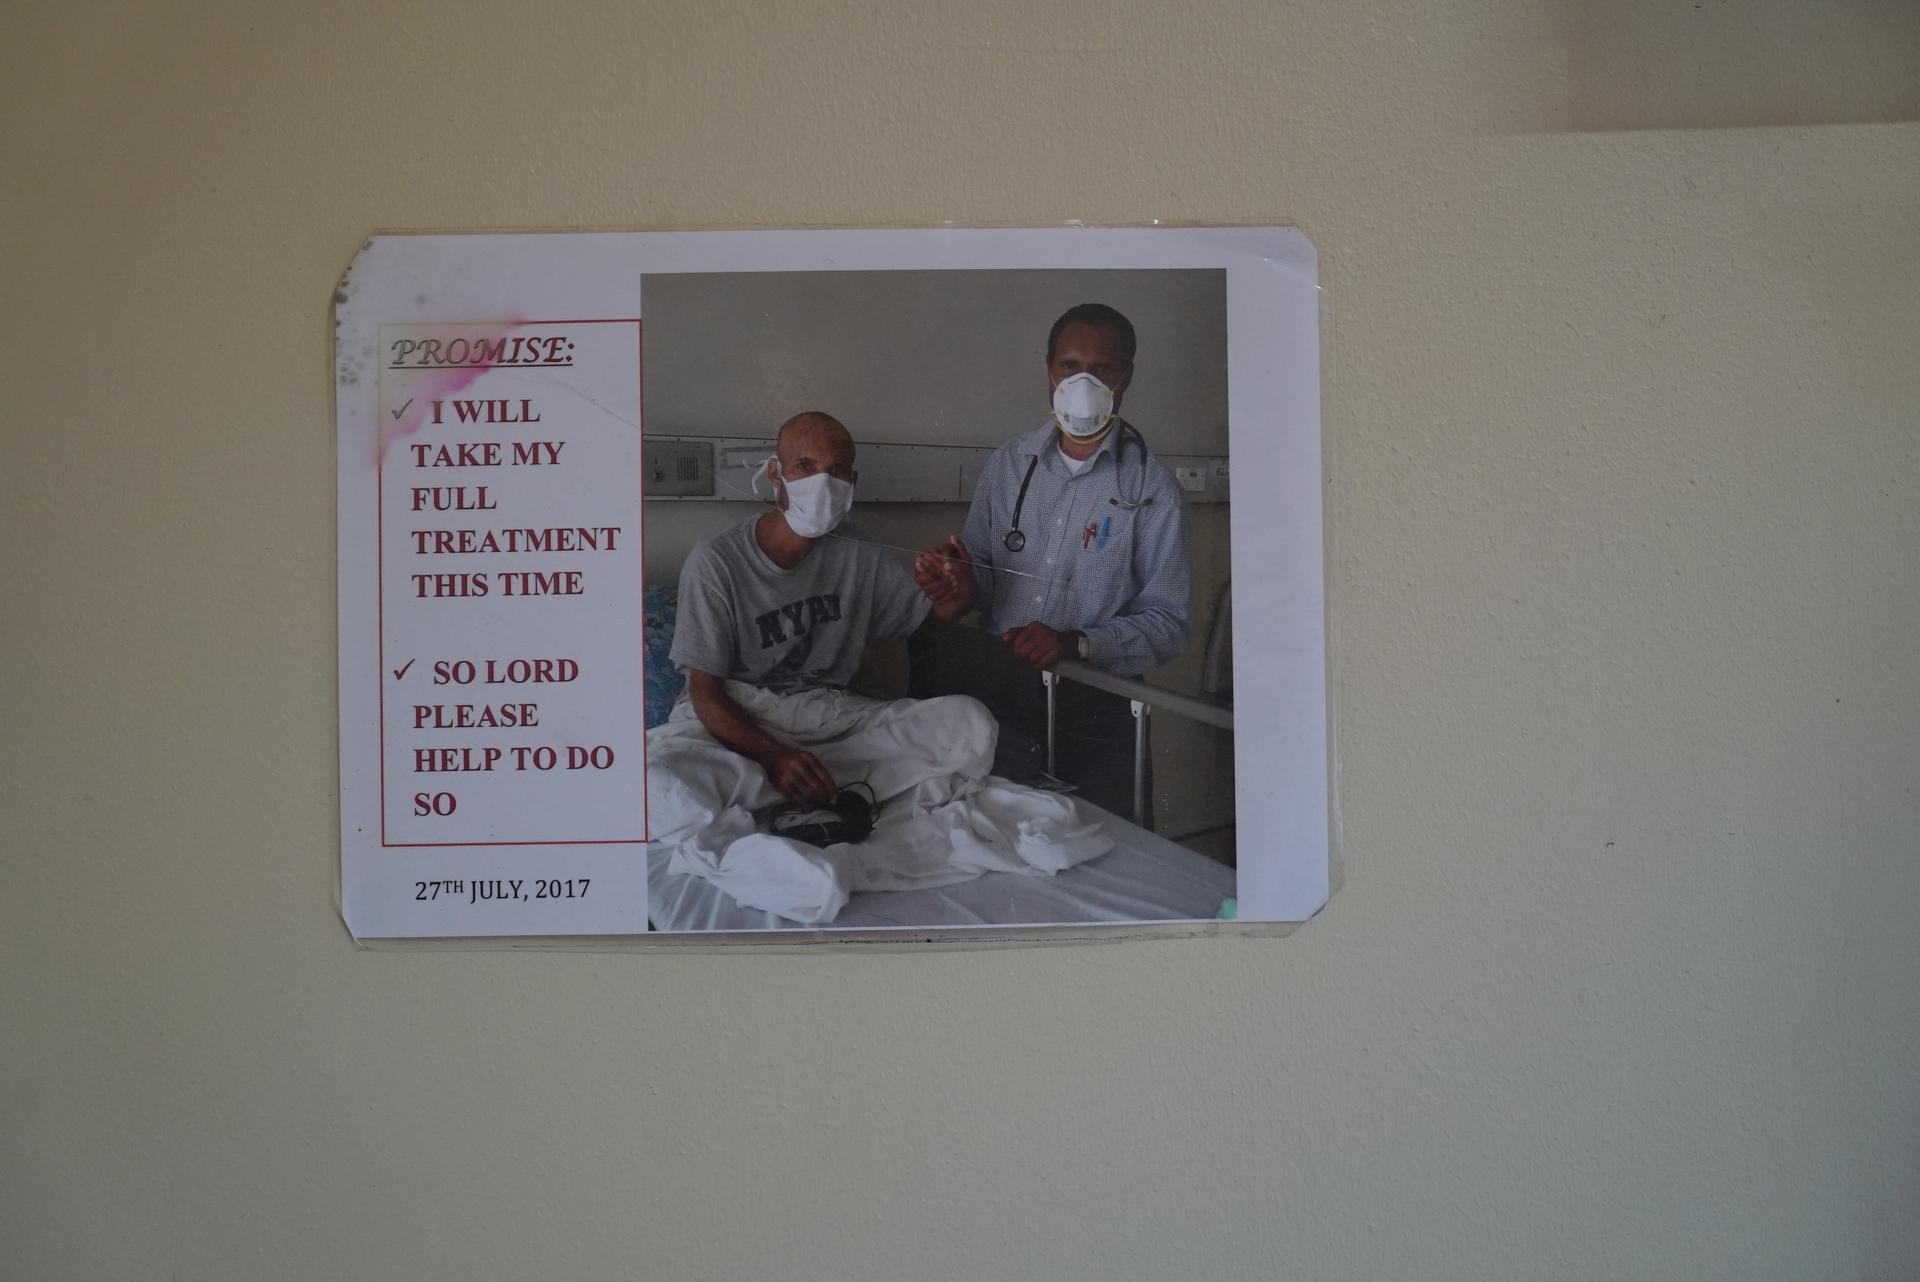 An image of a TB patient and his doctor hung on a wall